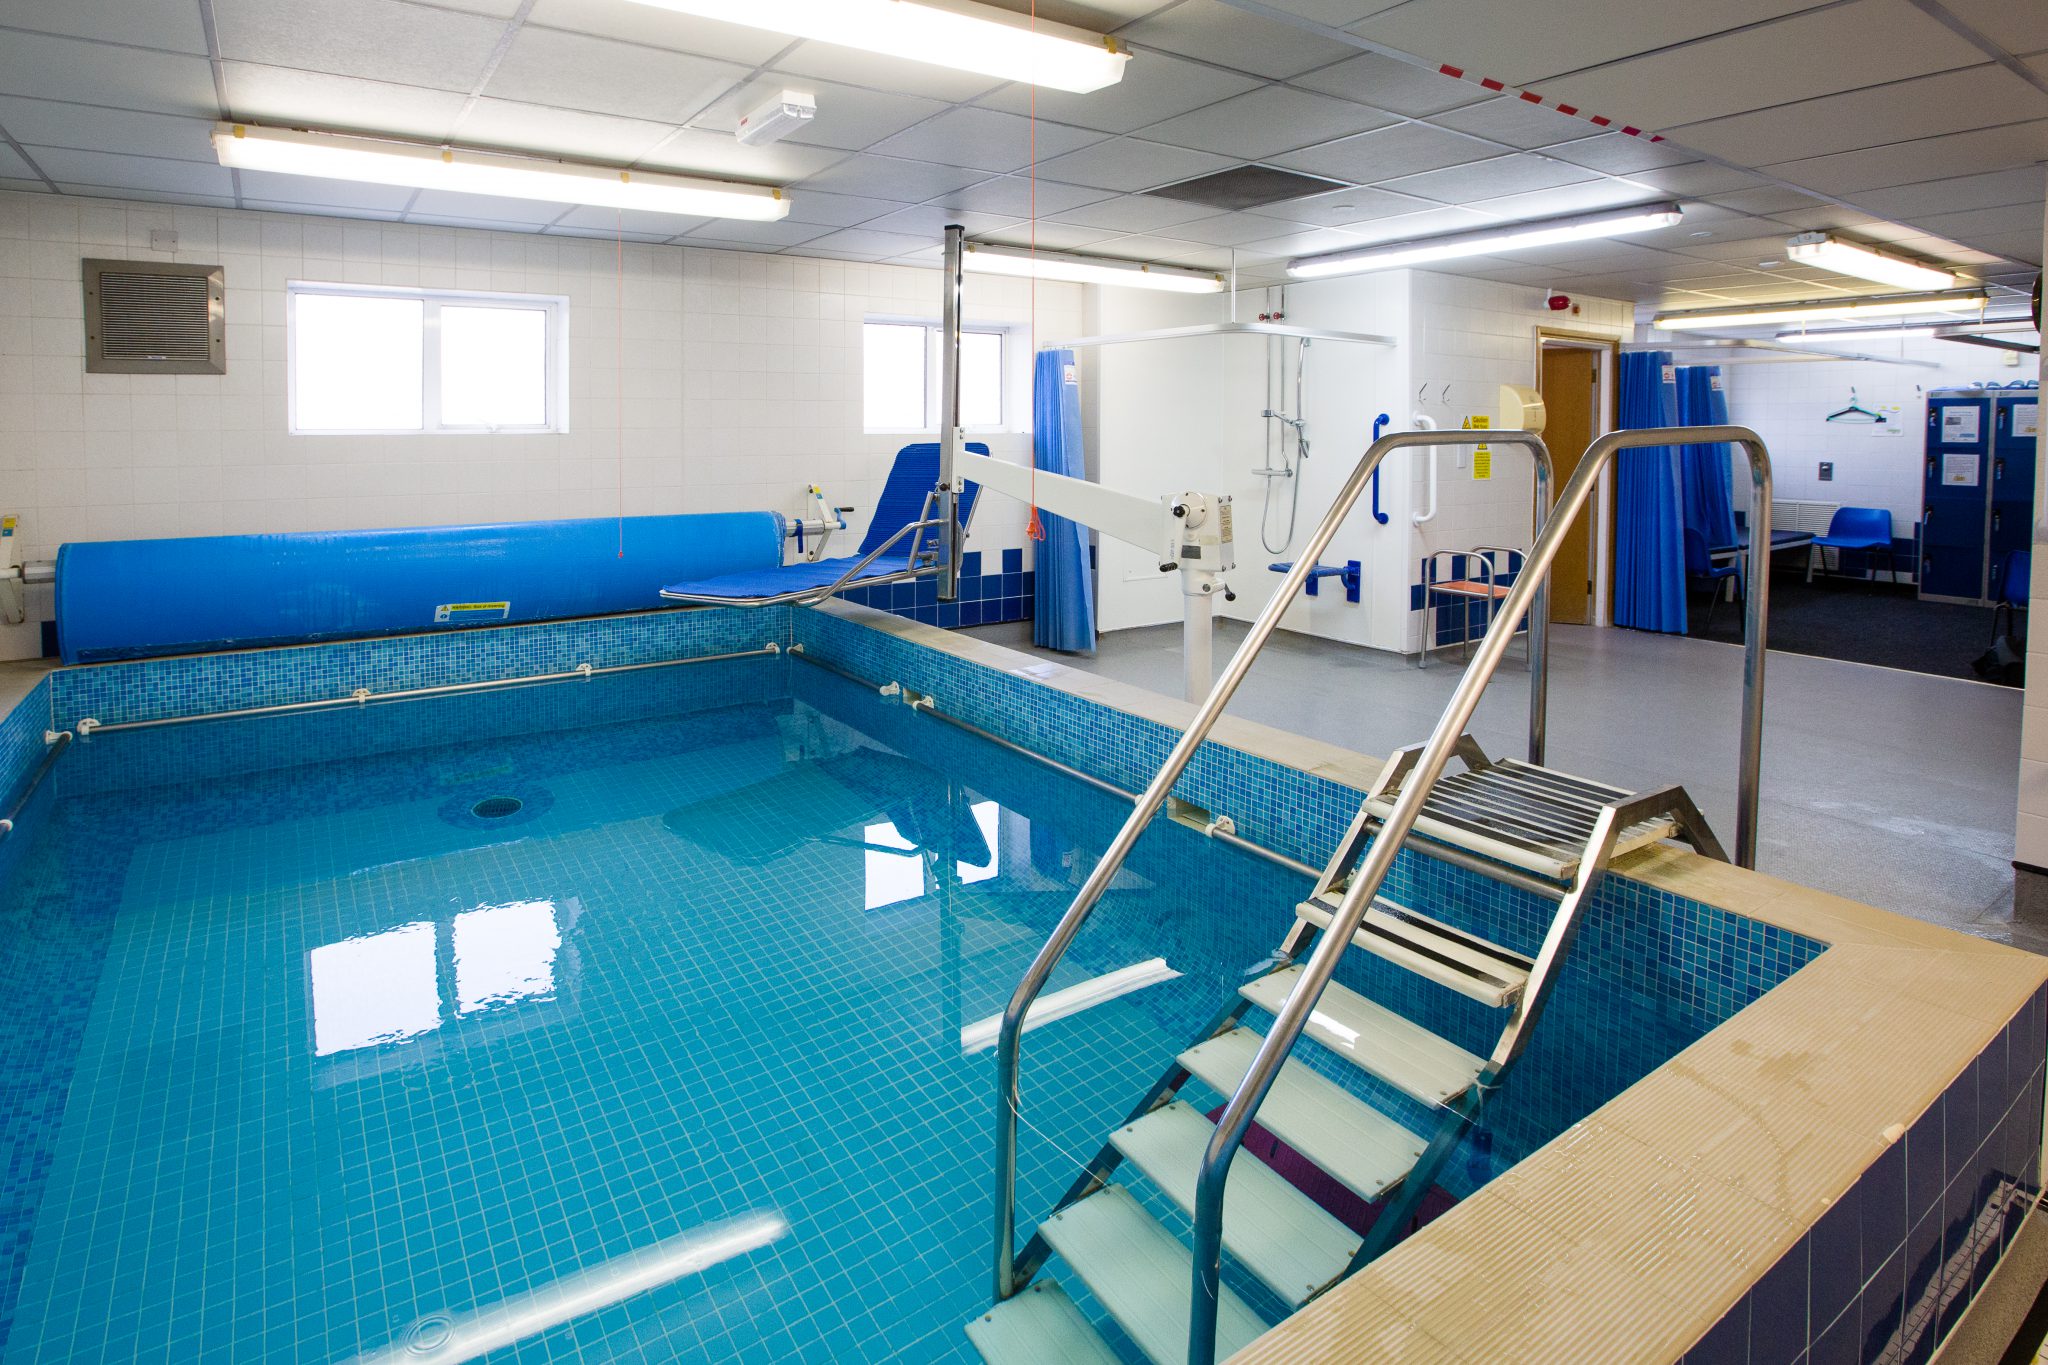 Hydrotherapy - Water provides optimum support to assist movement, function, strengthening and pain relief. The buoyancy, turbulence and increased hydrostatic pressure of water has significant physiological effects on the human body. 